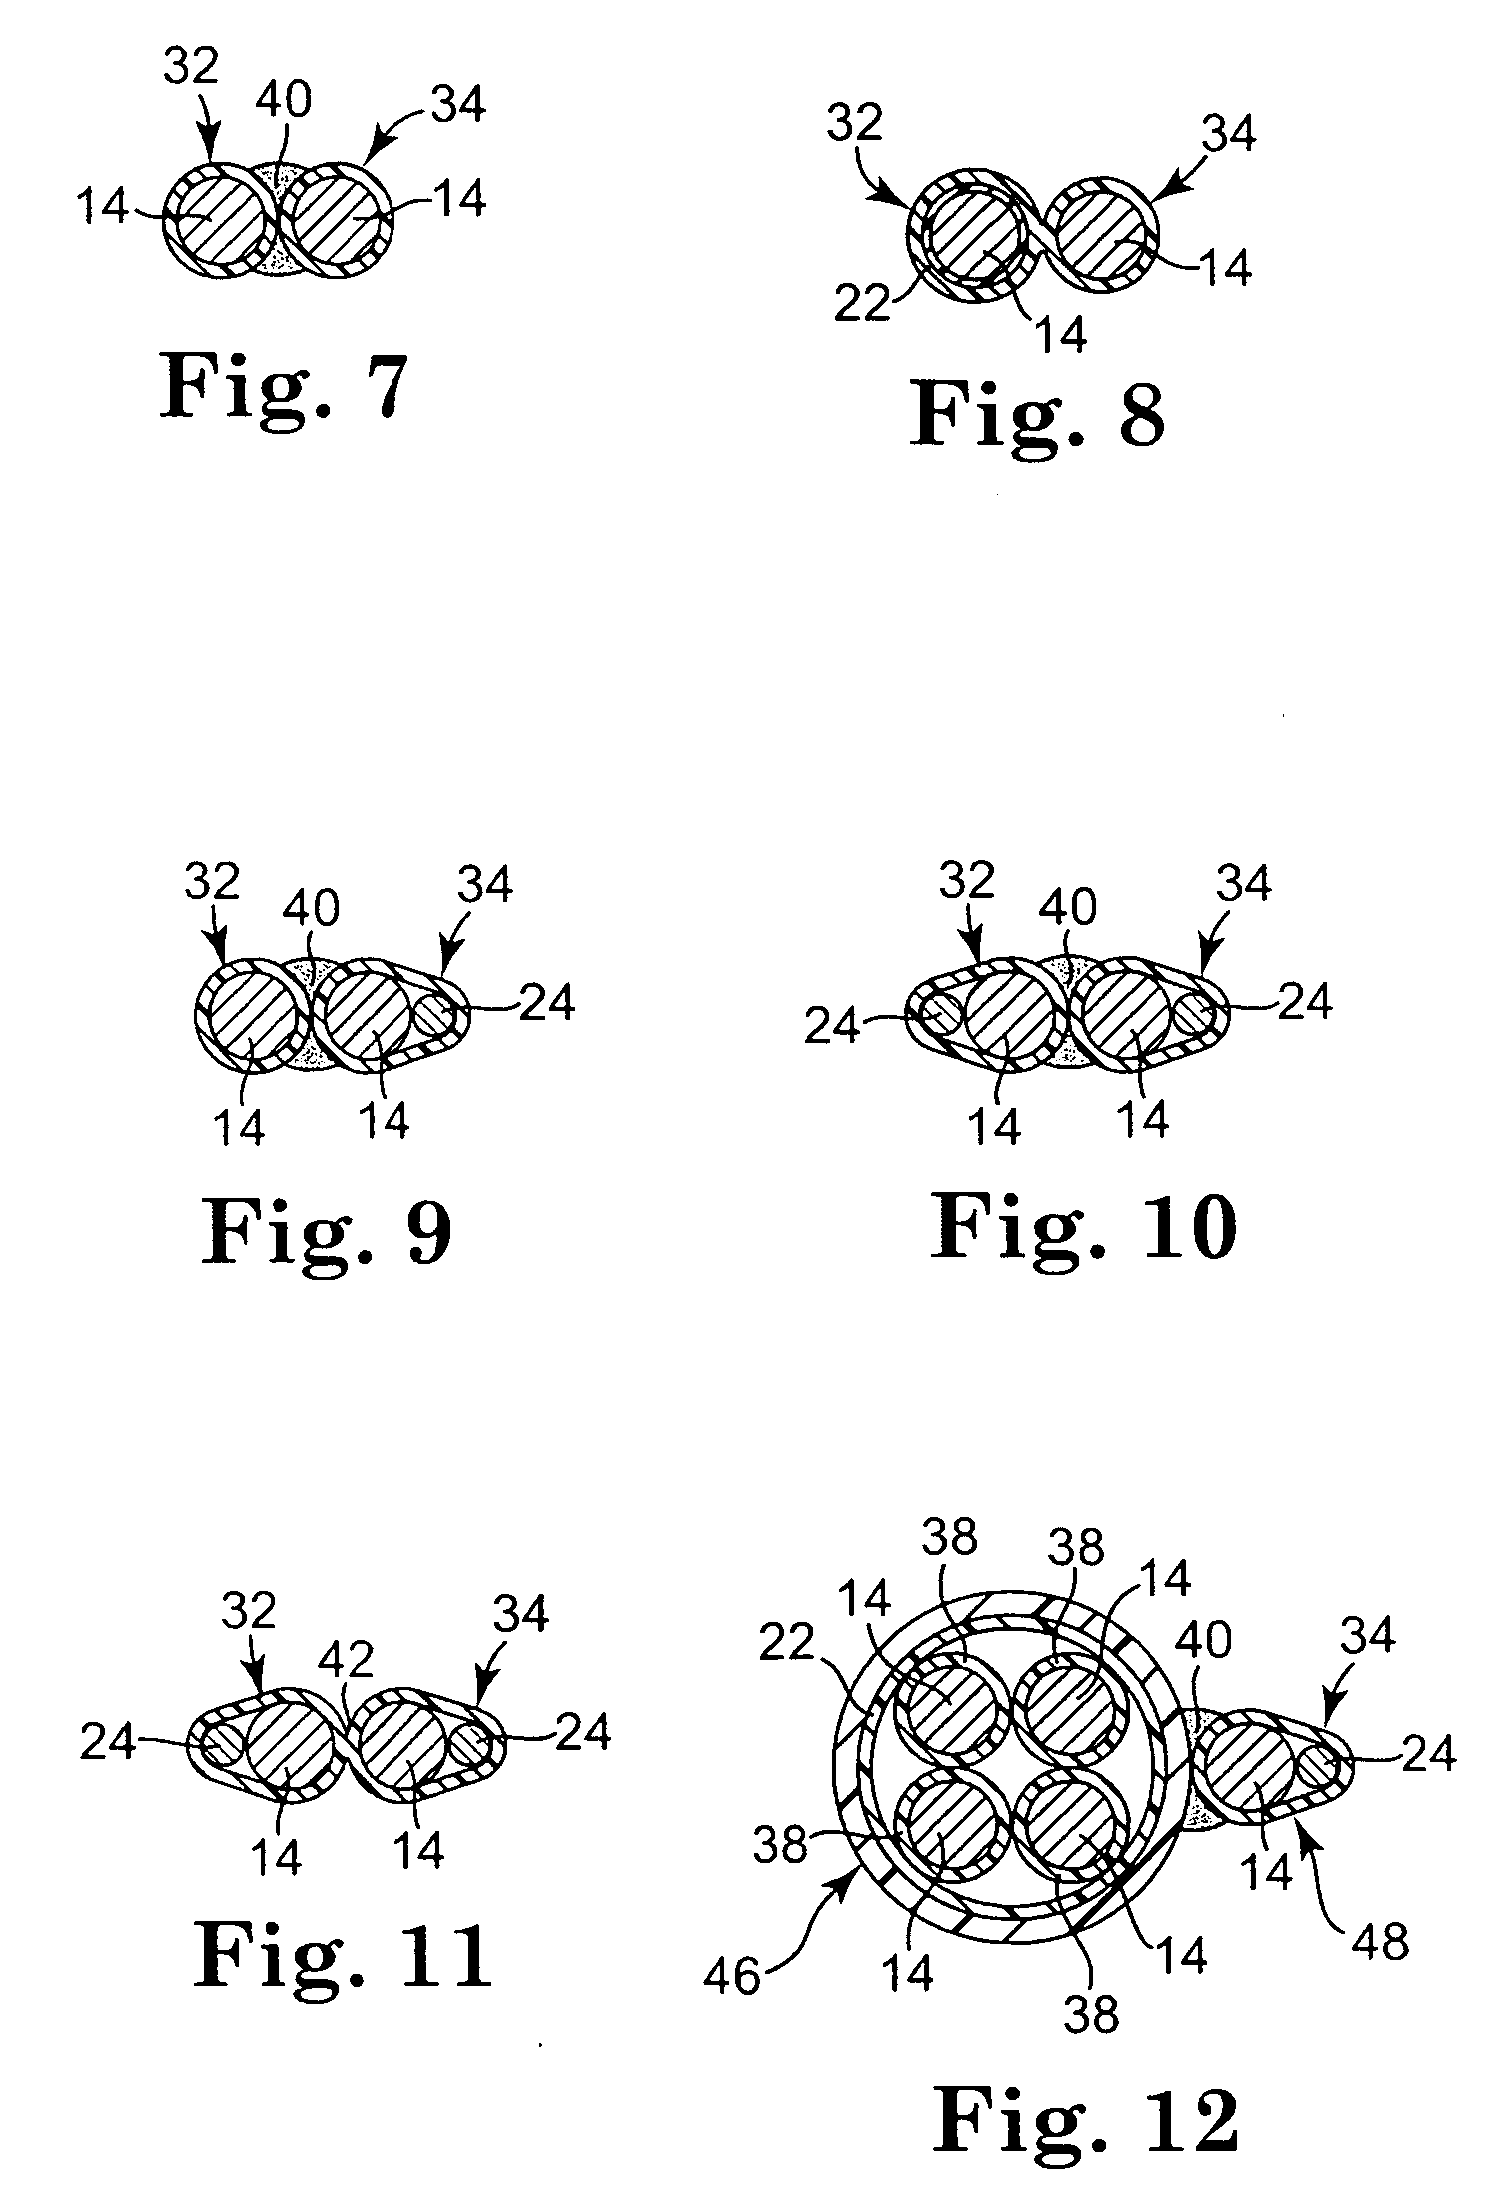 Implantable medical lead assemblies with improved flexibility and extensibility and having a substantially two-dimensional nature